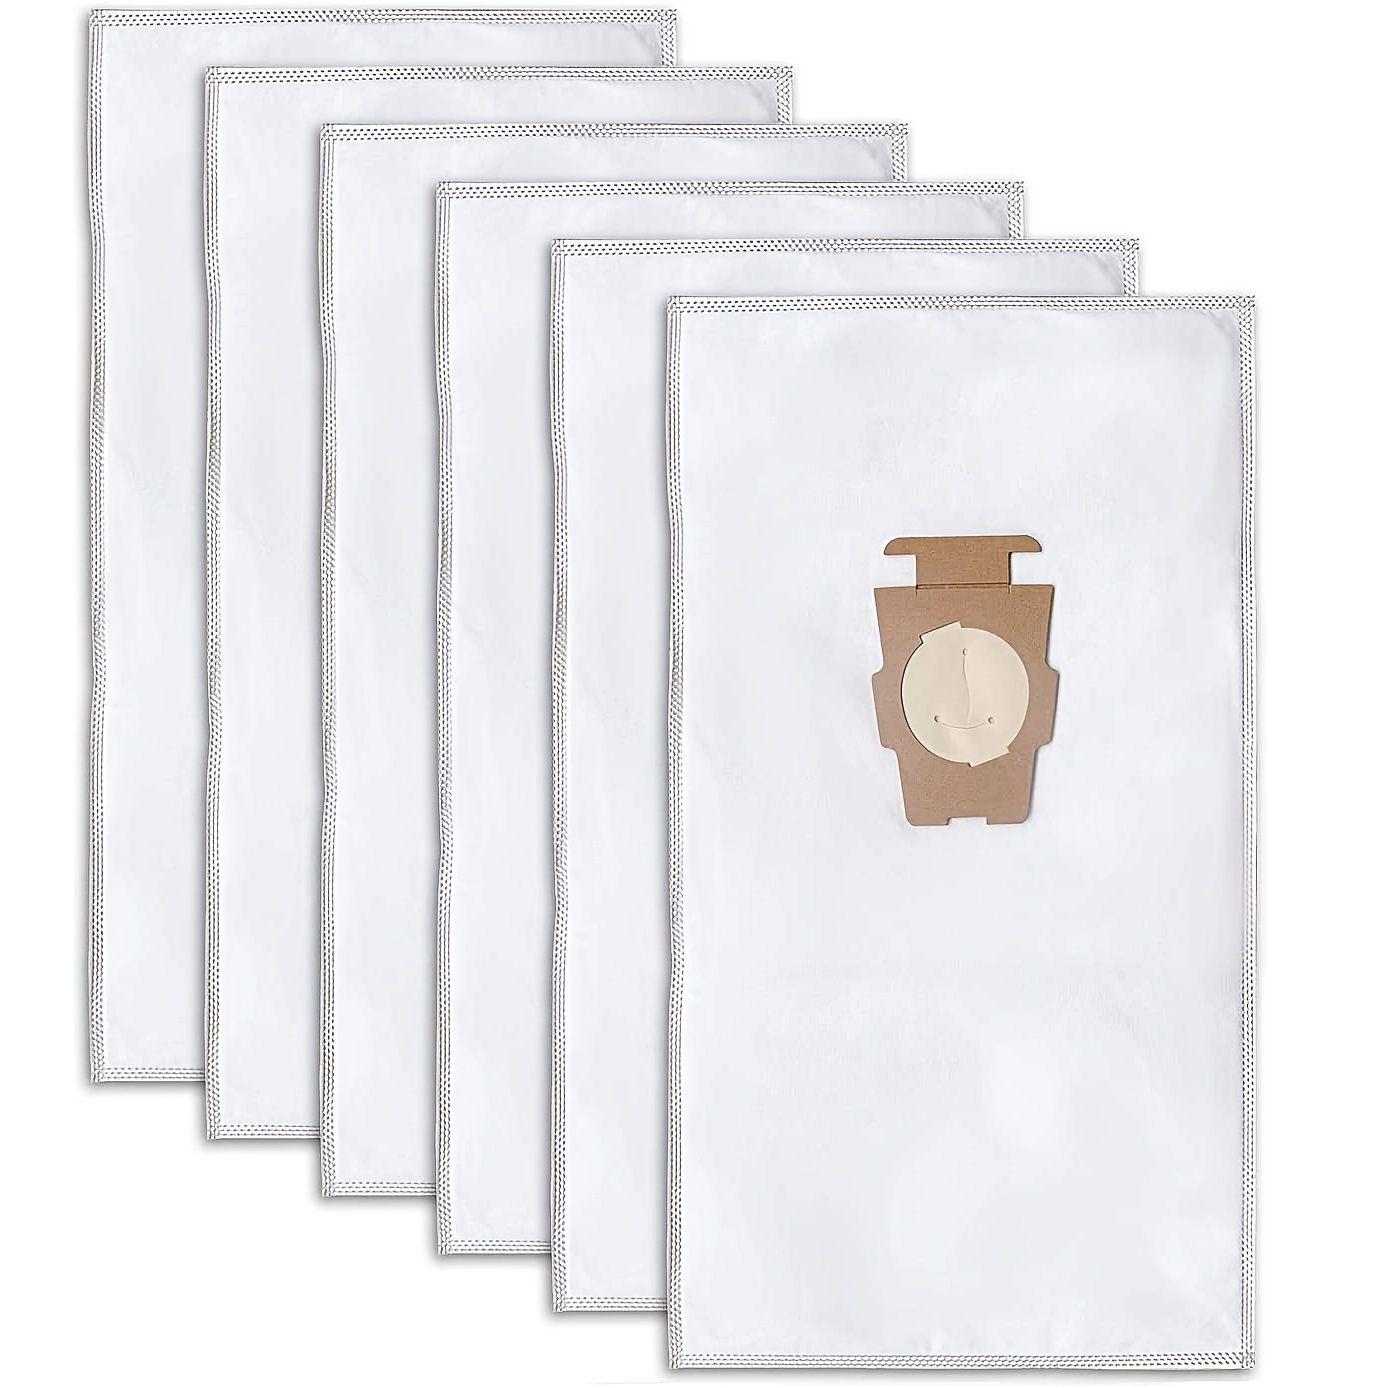 

3pcs/6pcs, Vacuum Cleaner Dust Bags For G3-g12 Models - Efficient And Long-lasting Filtration For Superior Cleaning